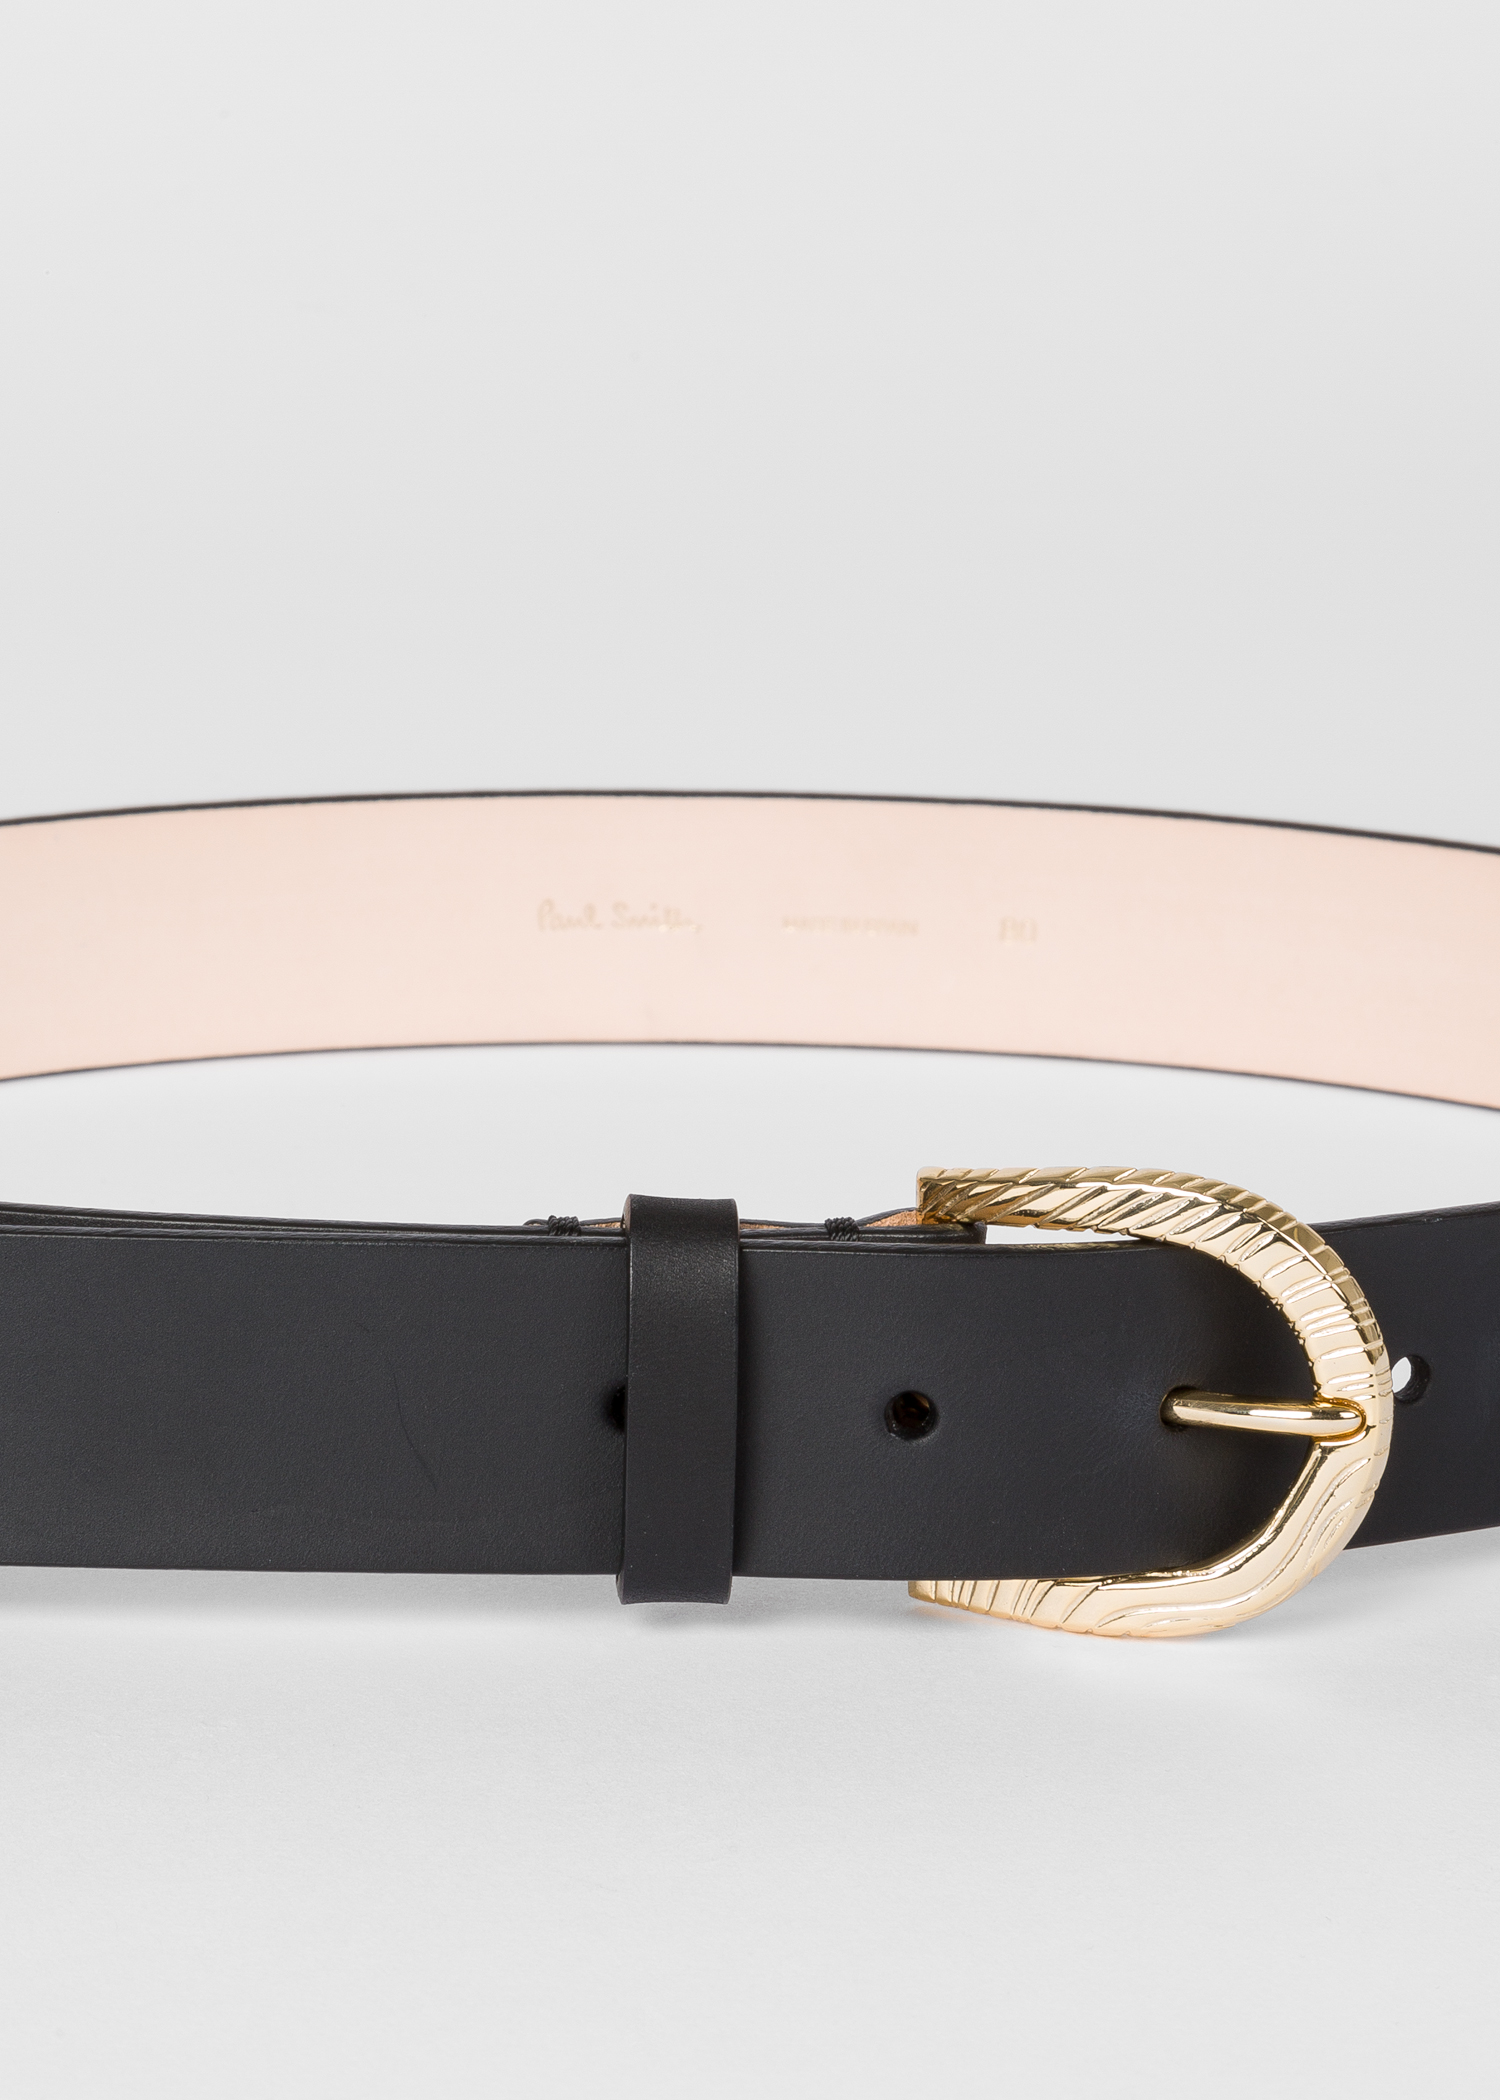 Detail view - Women's Black Leather Belt With 'Swirl' Embossed Buckle Paul Smith